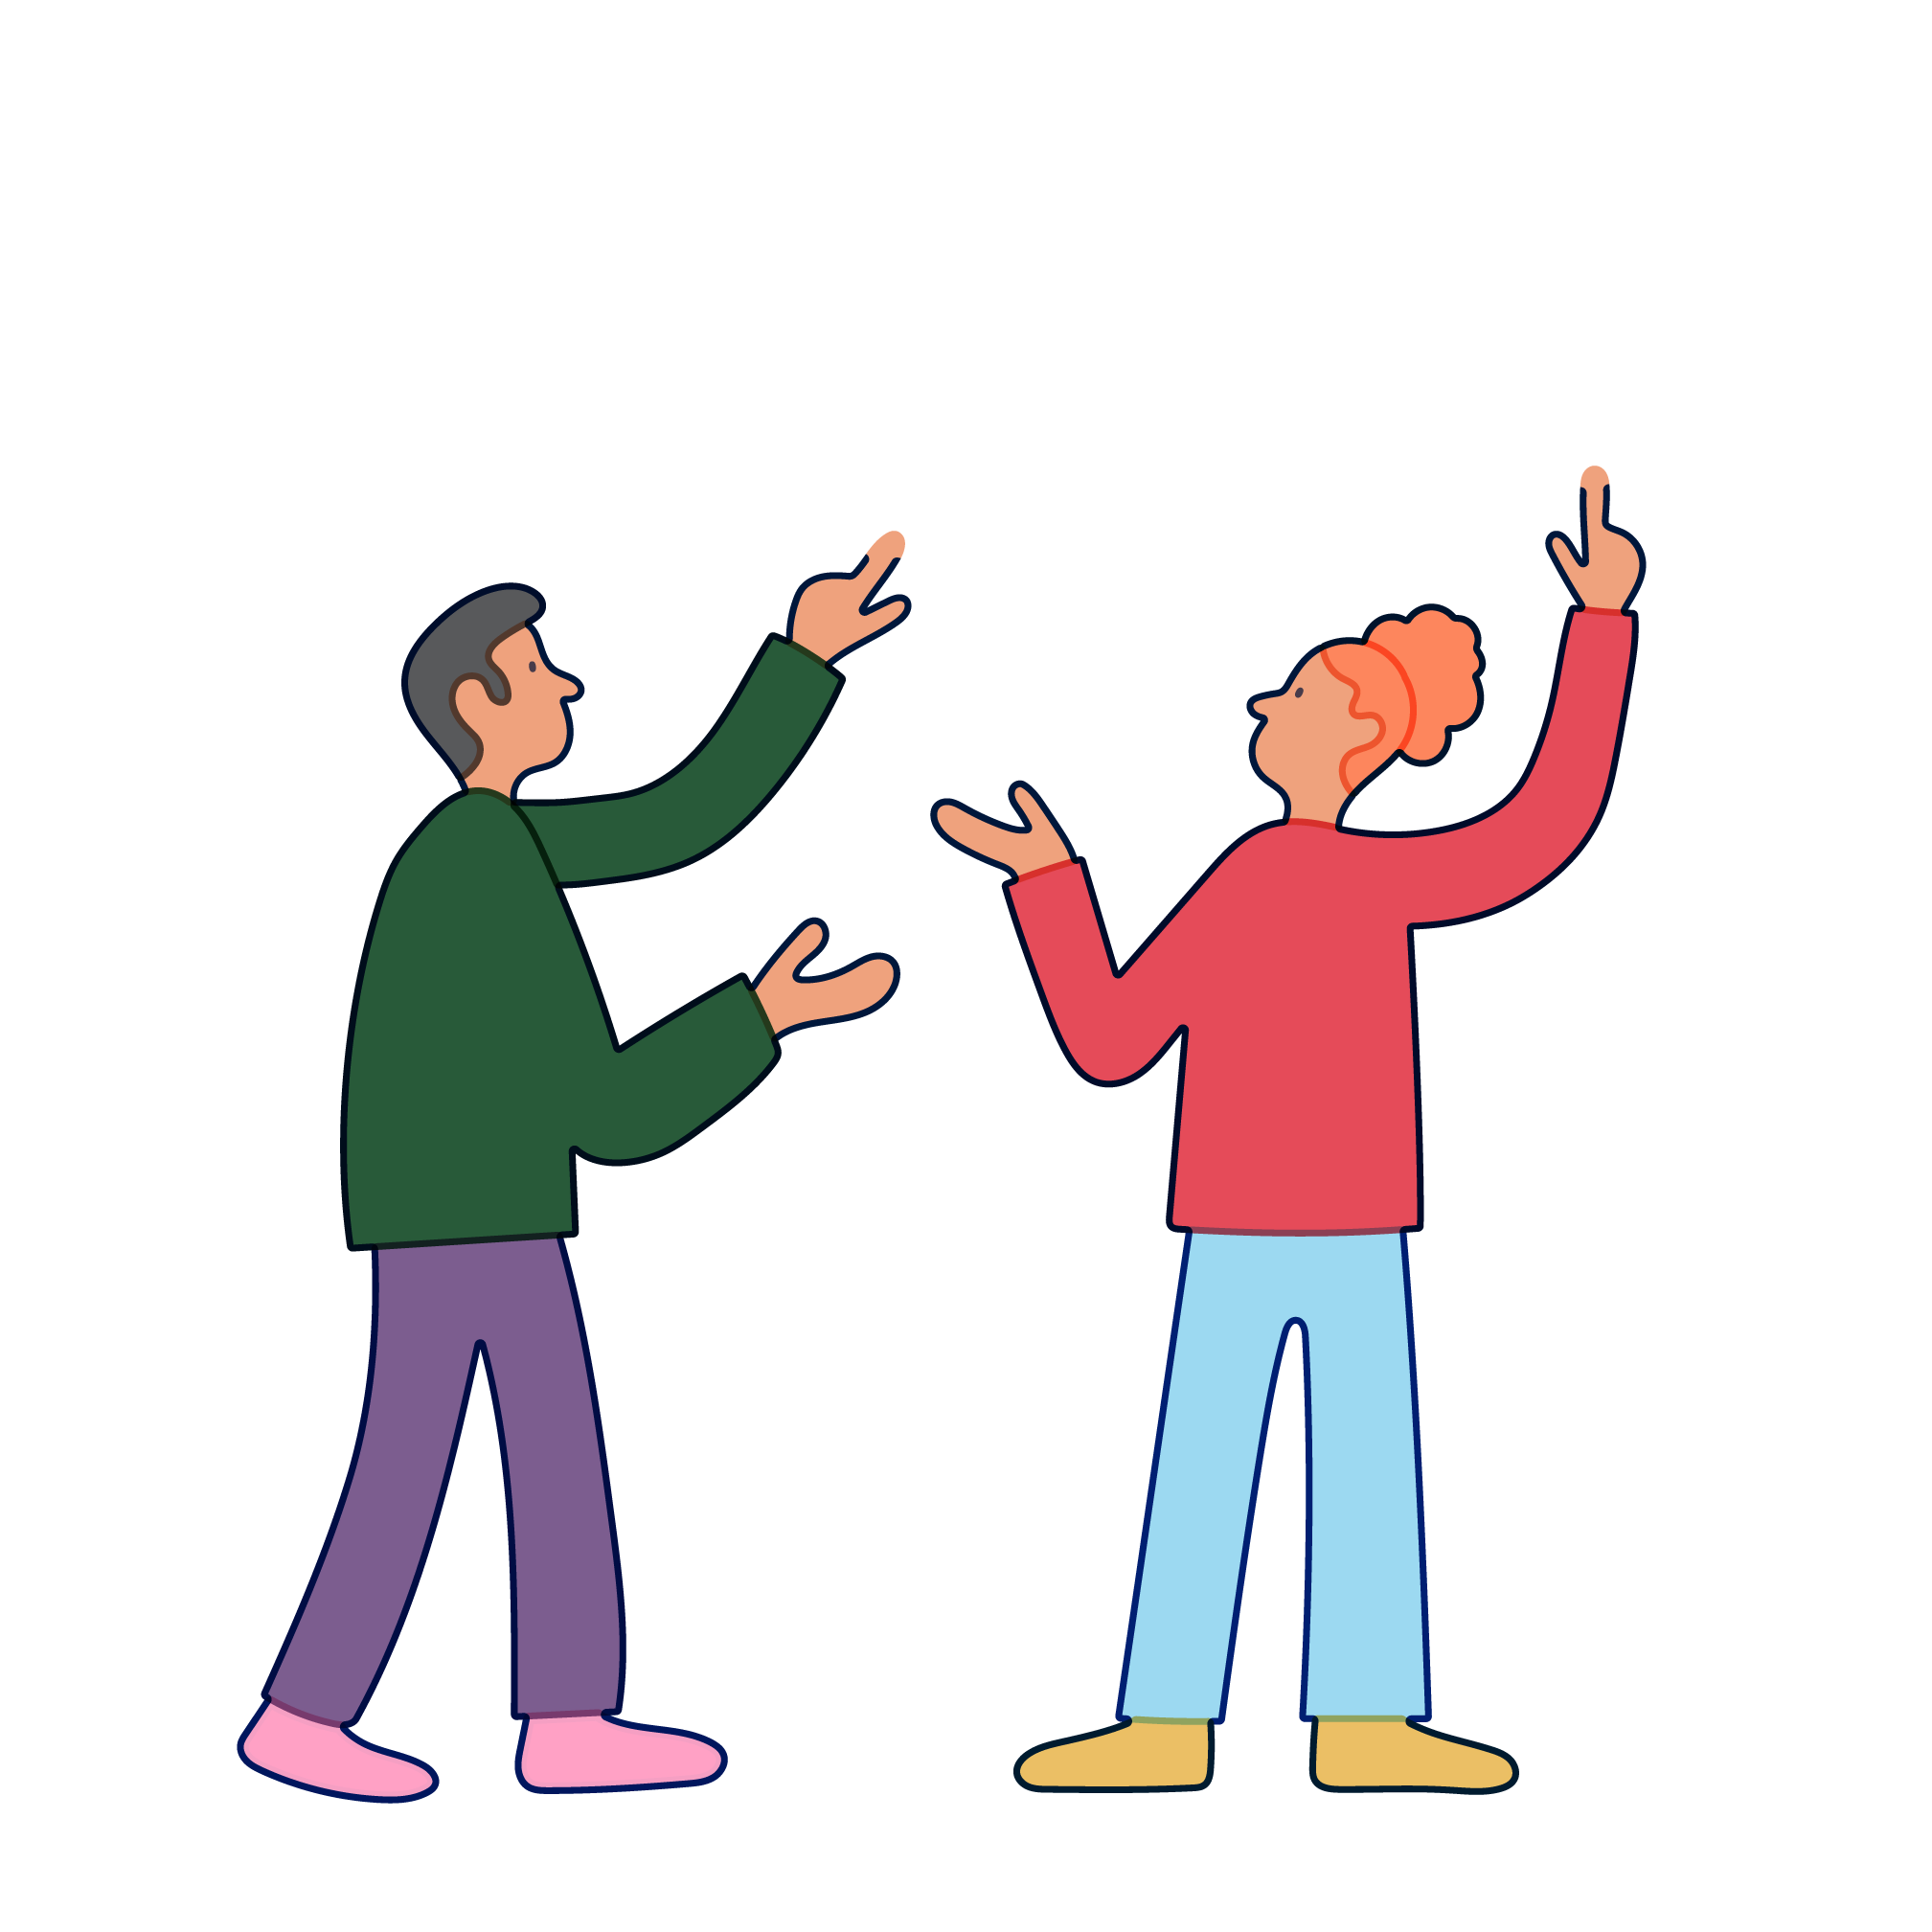 Two people have an animated chat with empty speech bubbles over their heads.